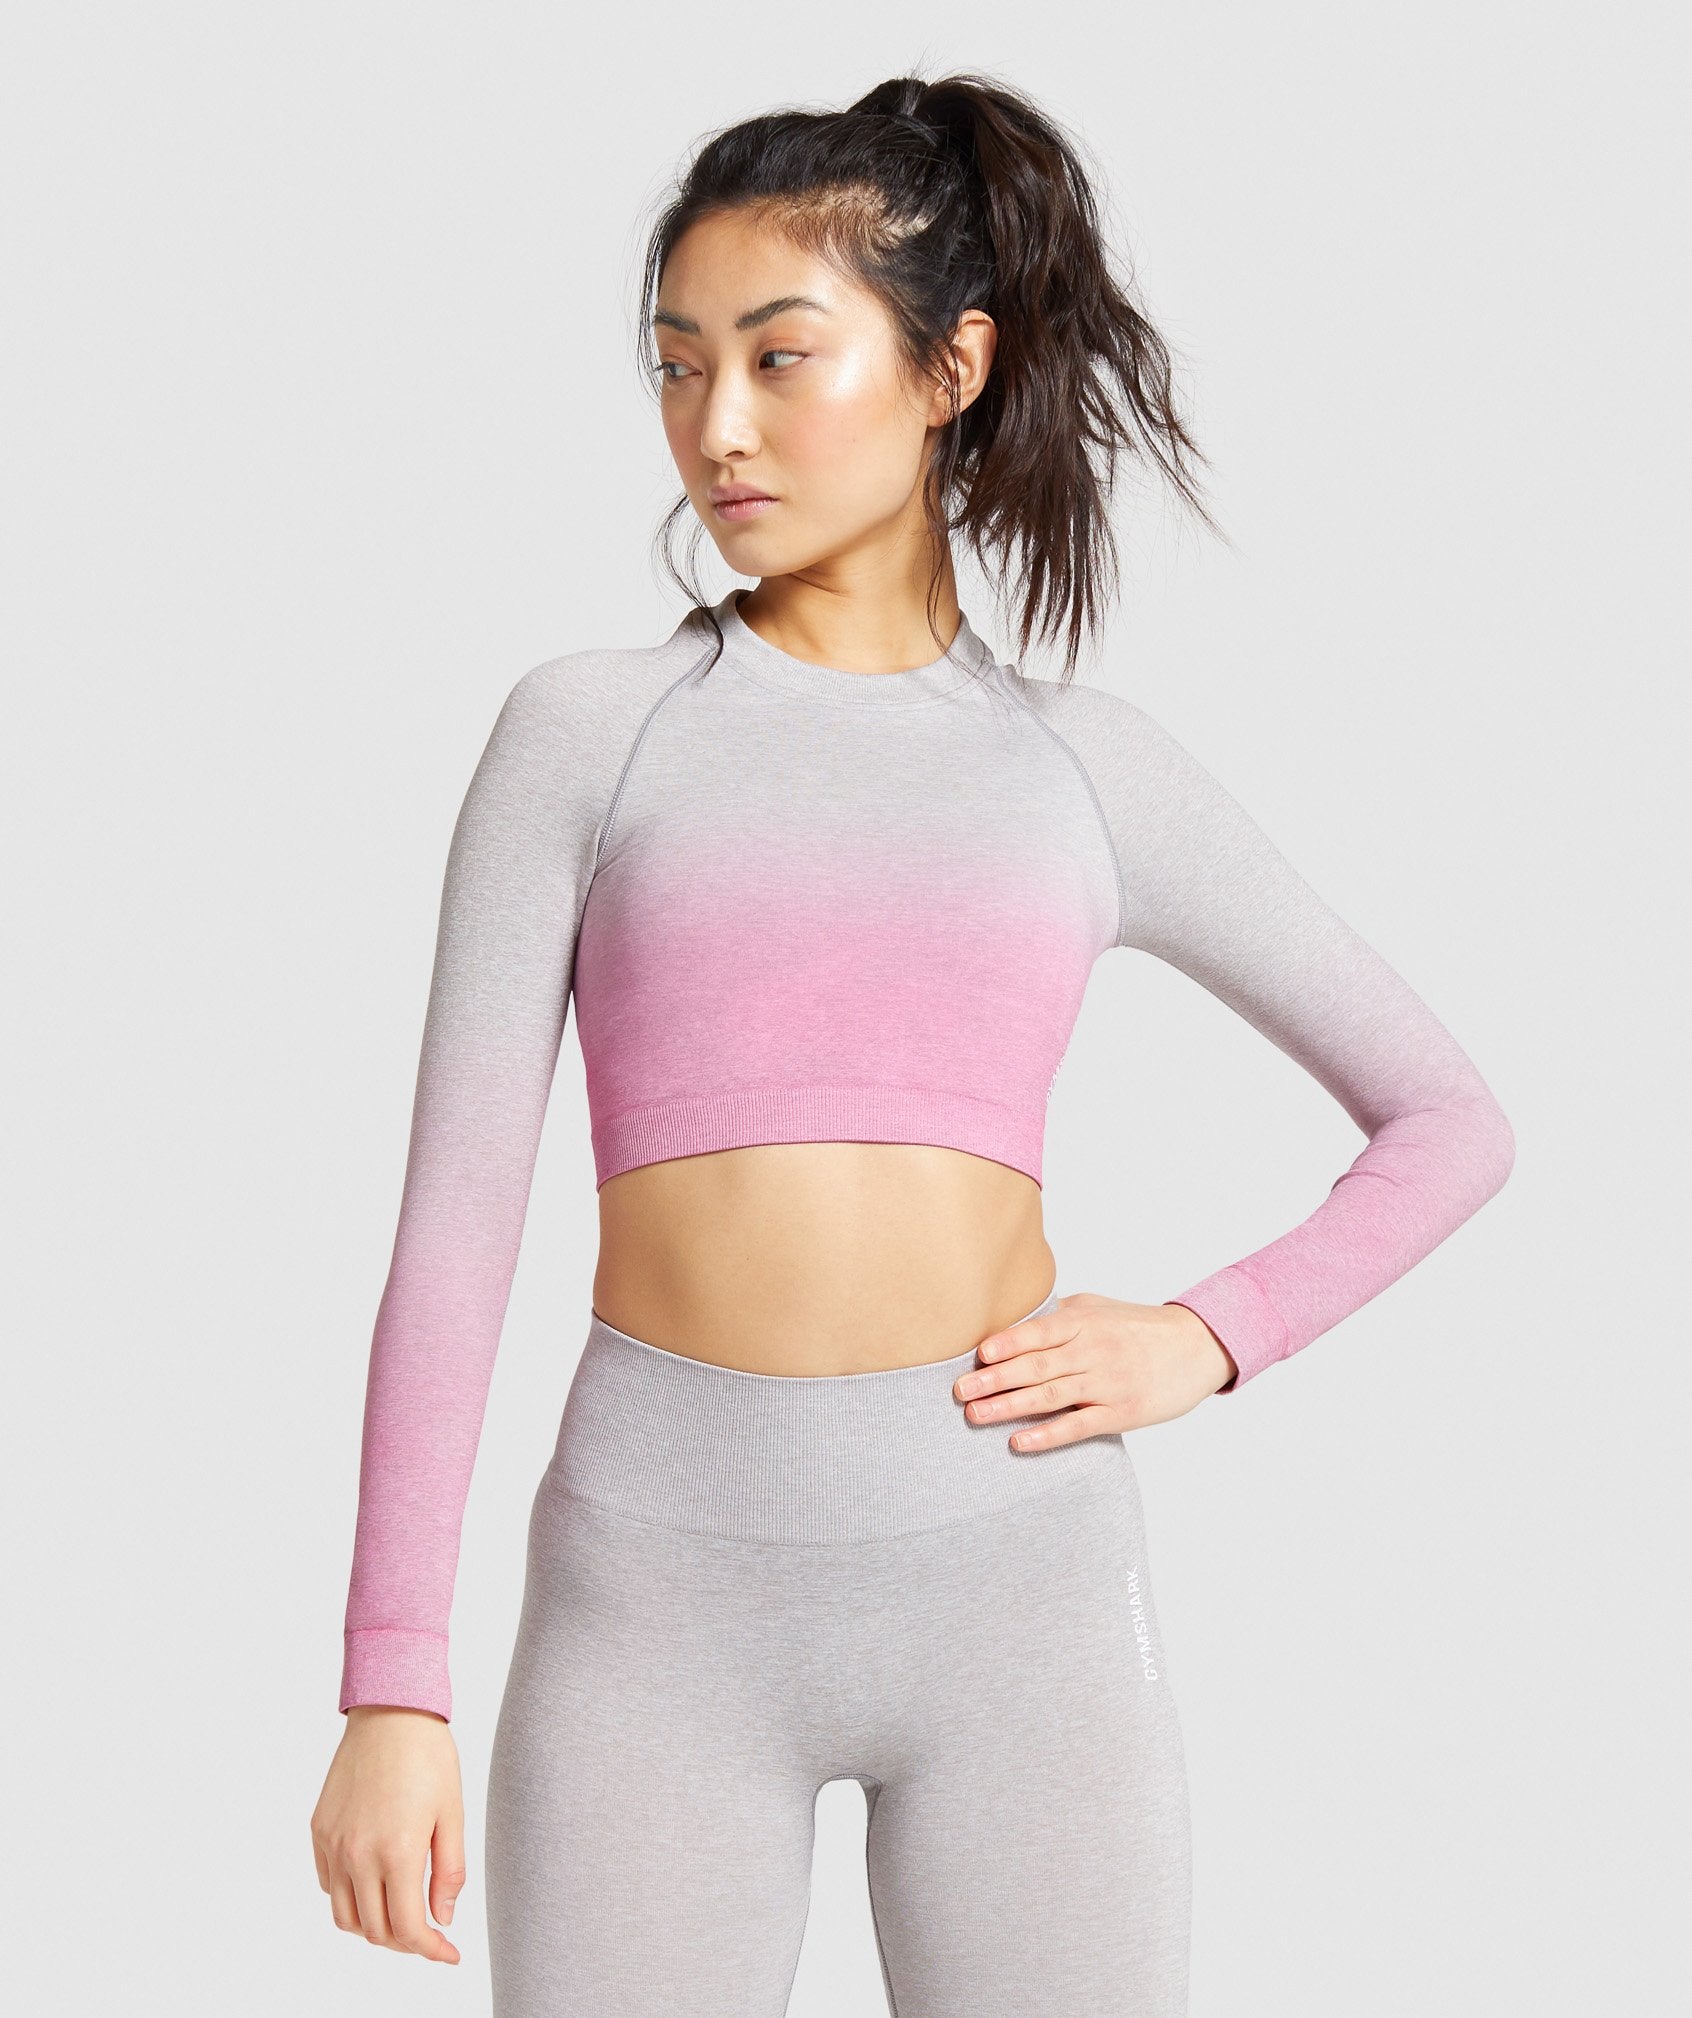 Ombre Seamless Yoga Outfit Sets Set For Women Long Sleeve Crop Top